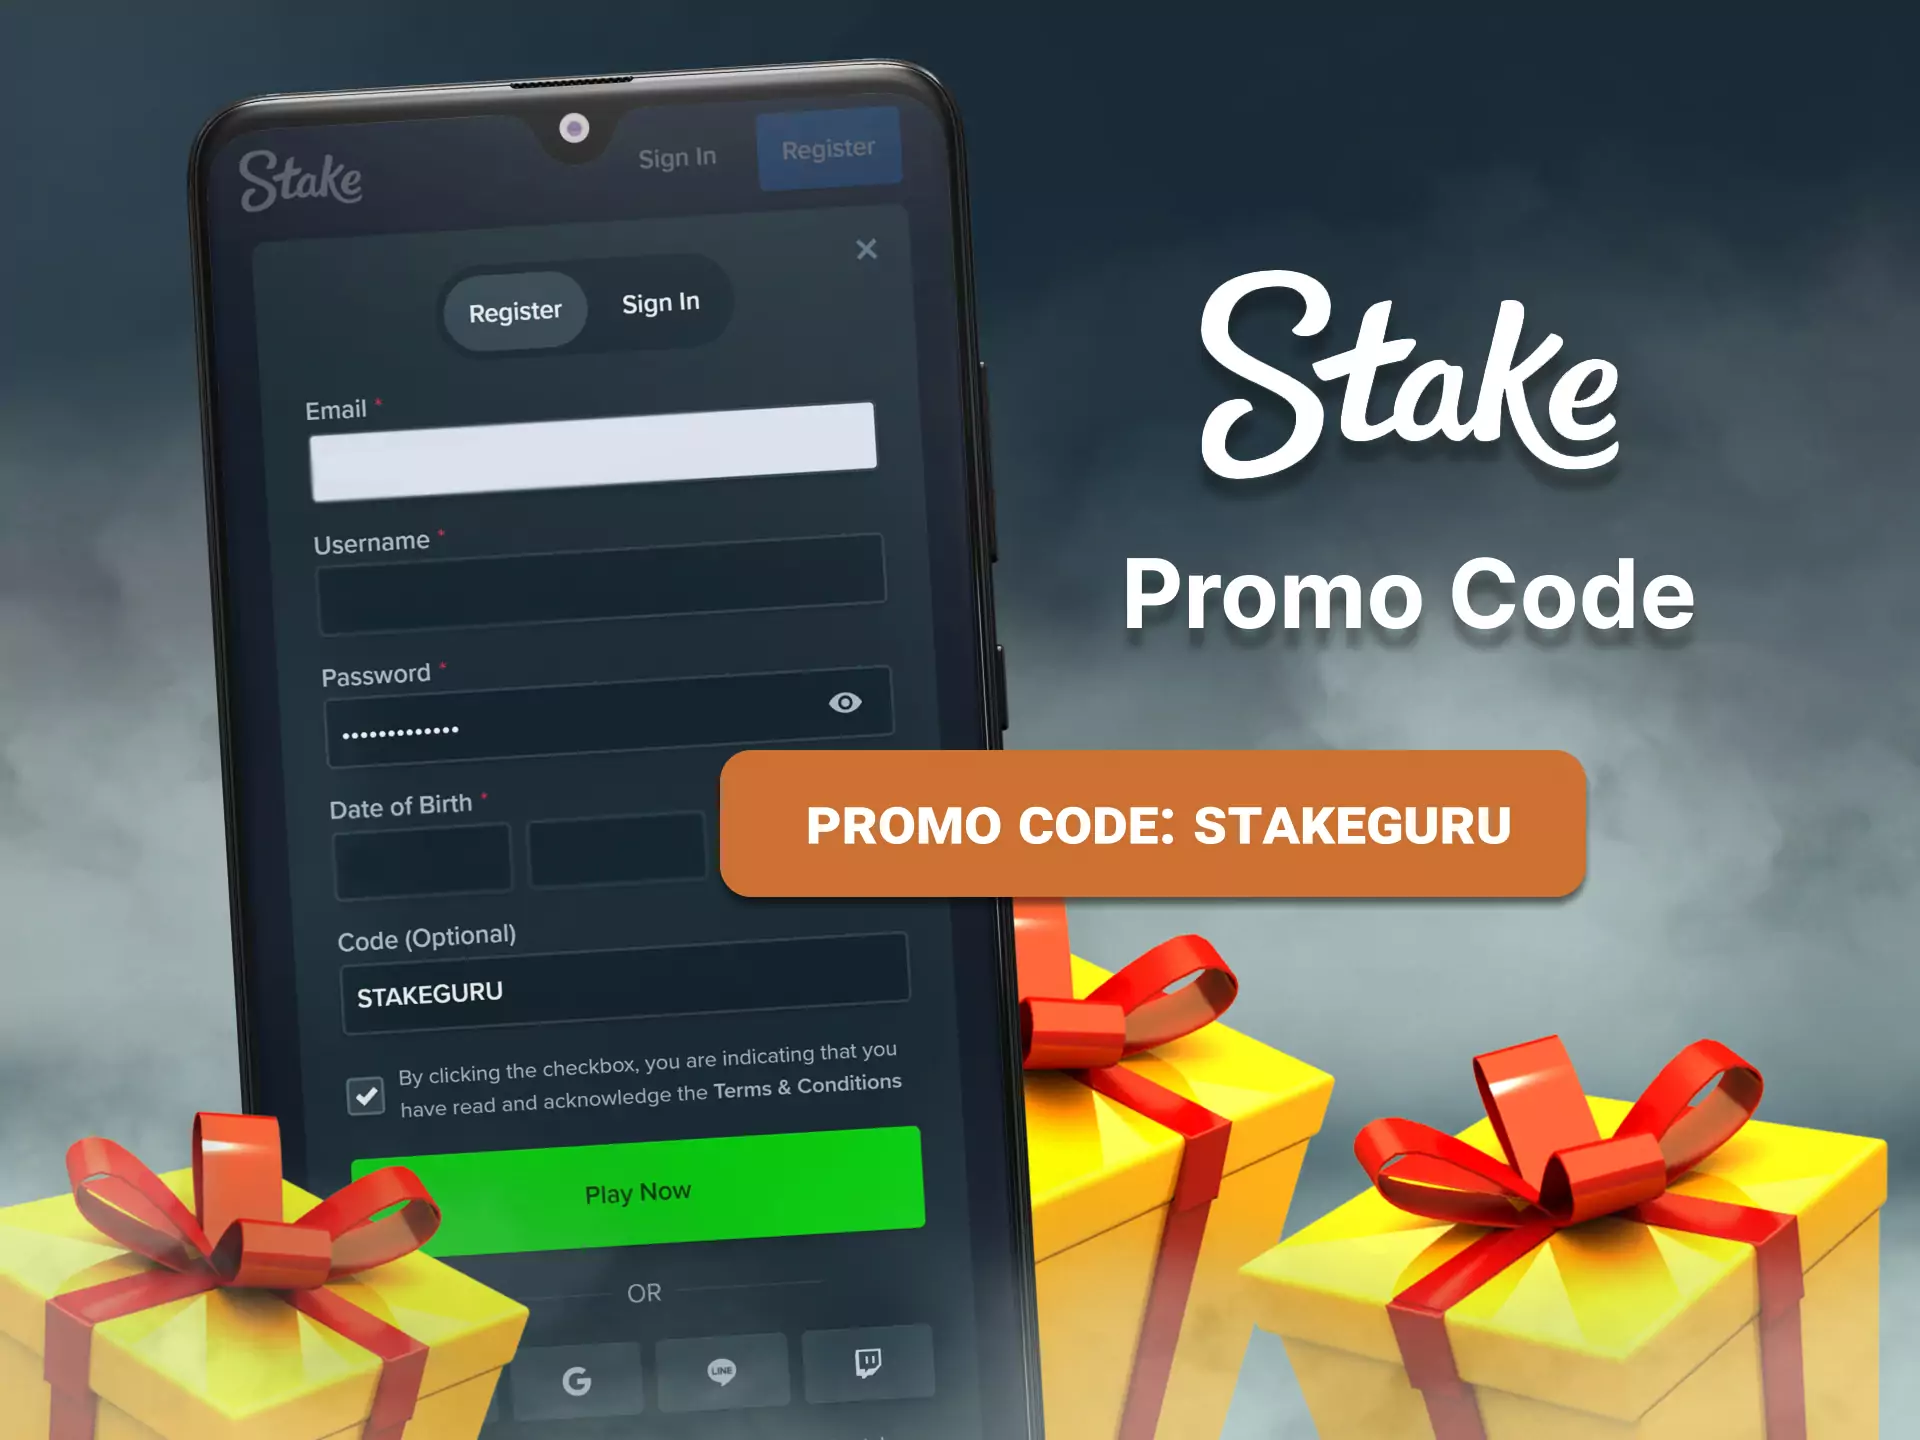 Use a special promo code when registering on Stake.com.